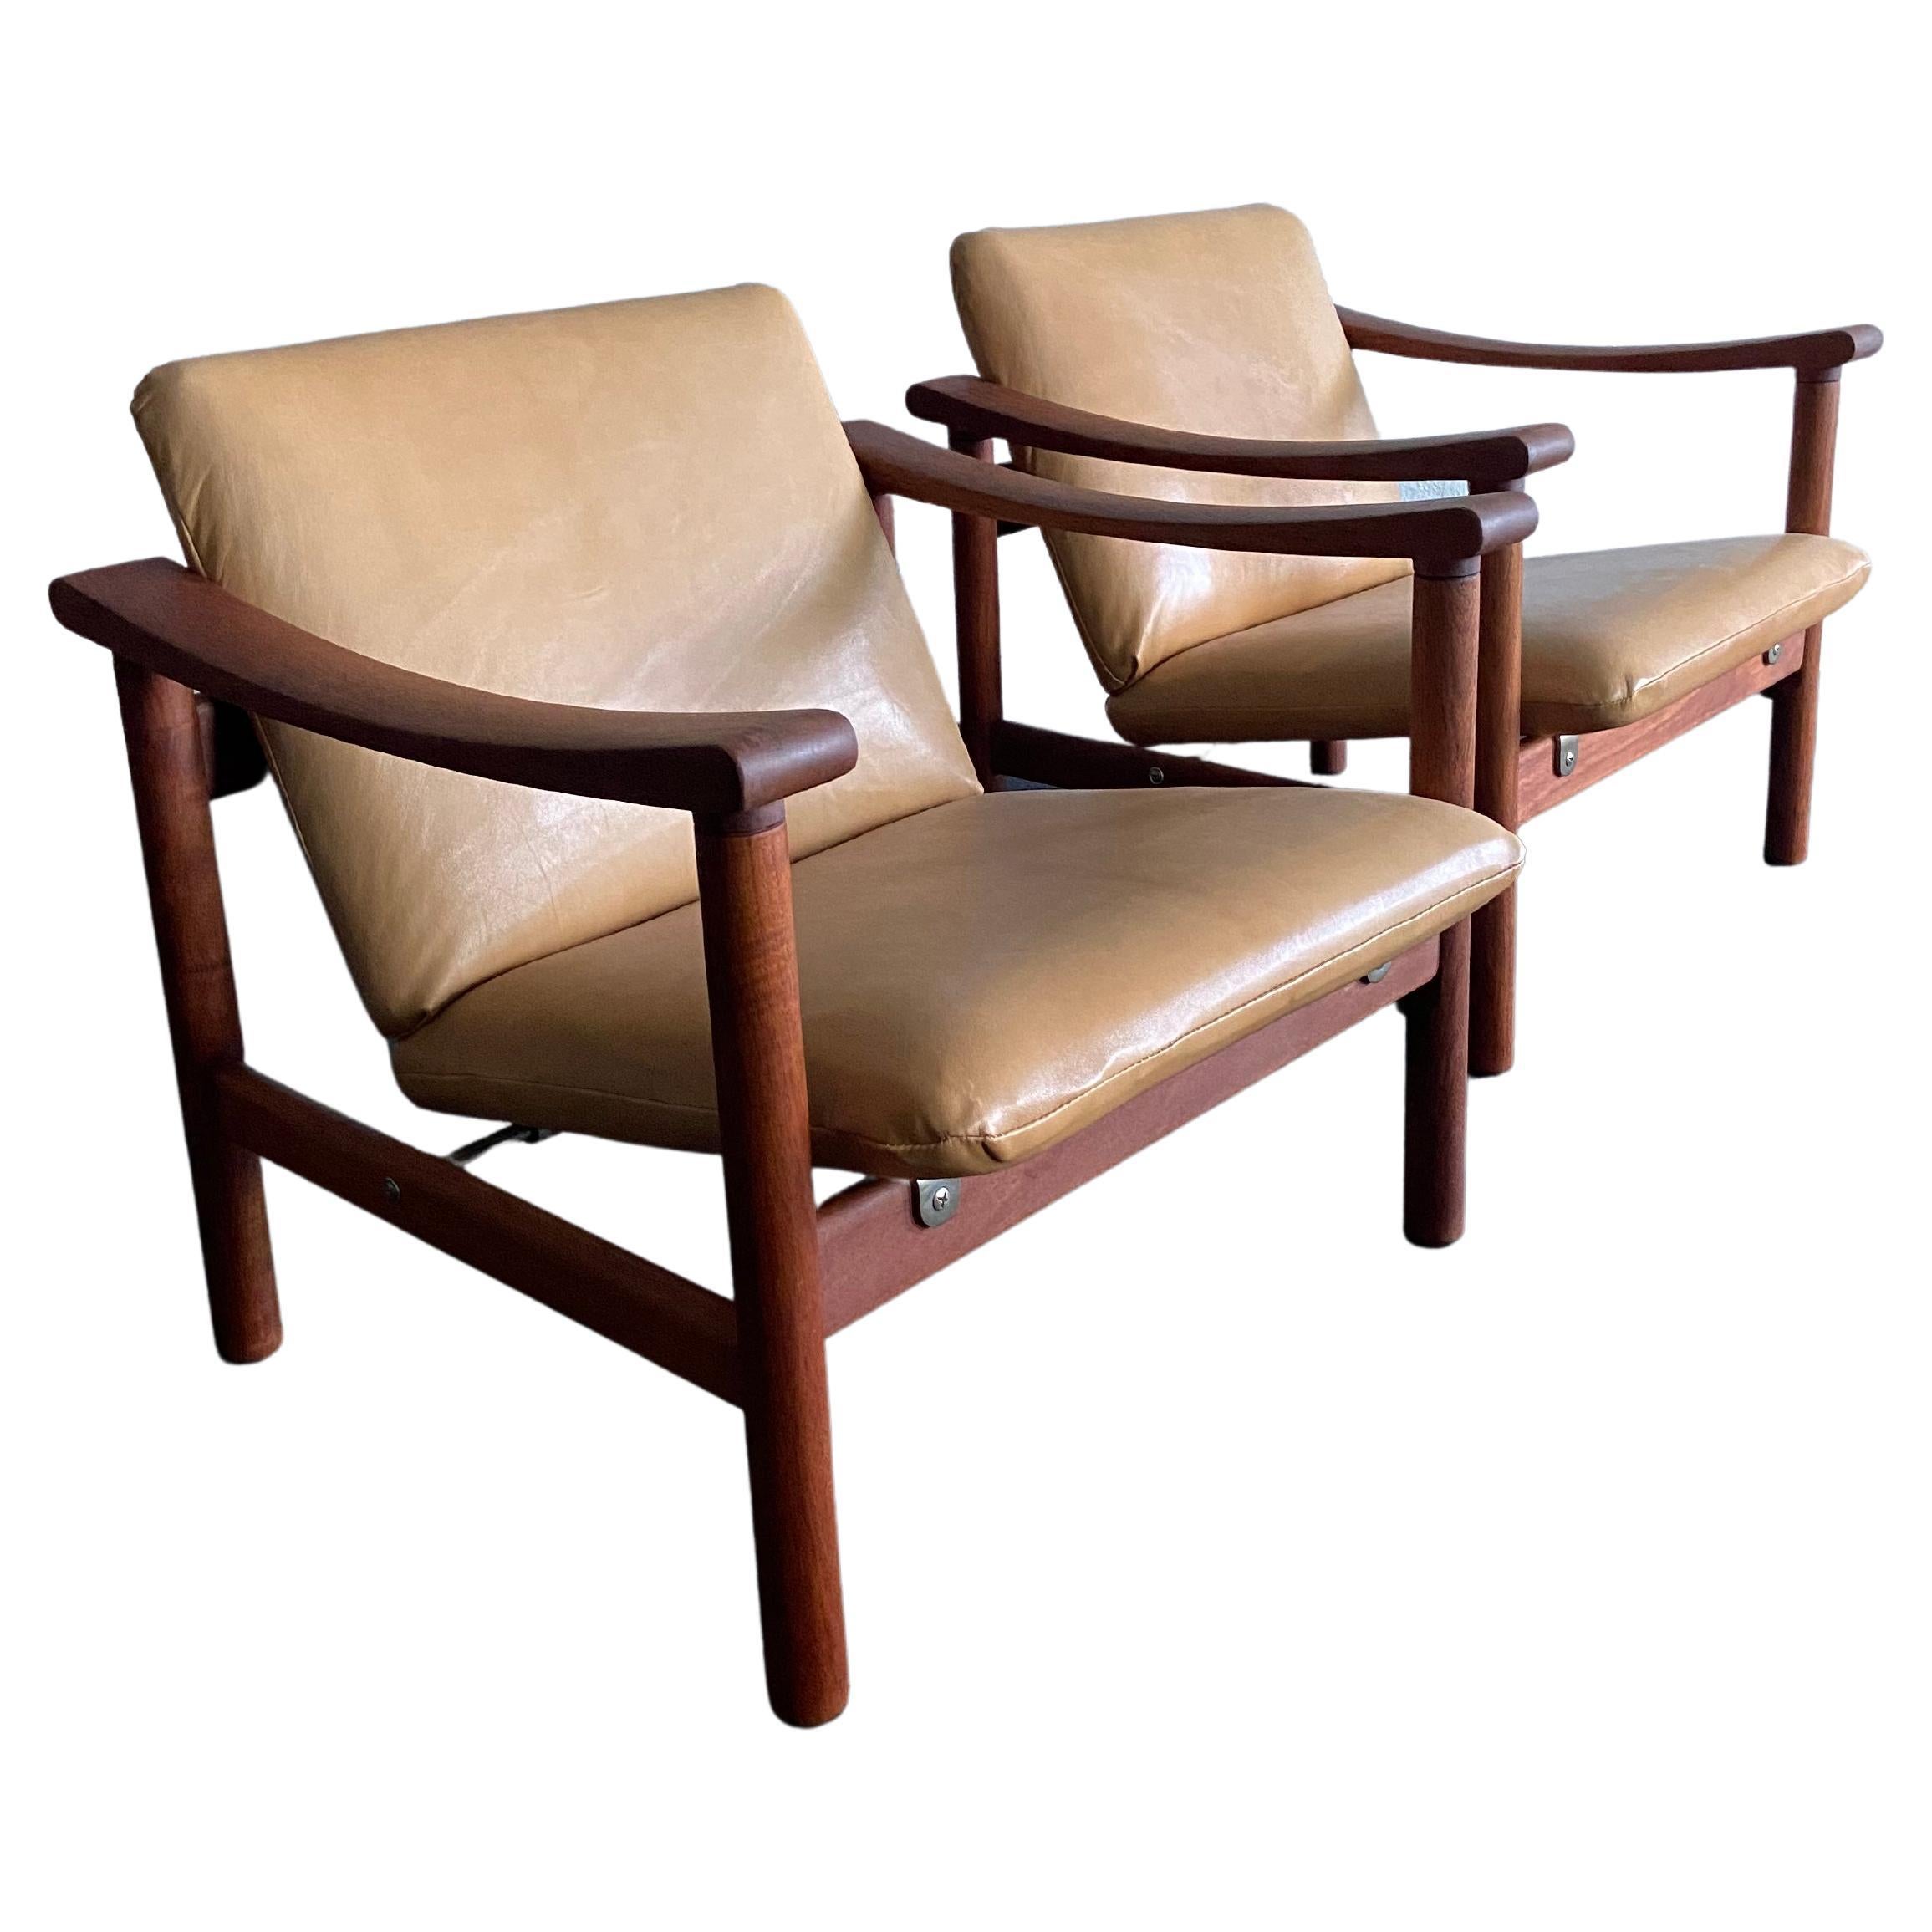 Hans Wegner for Getama Leather Lounge Chairs - a Pair